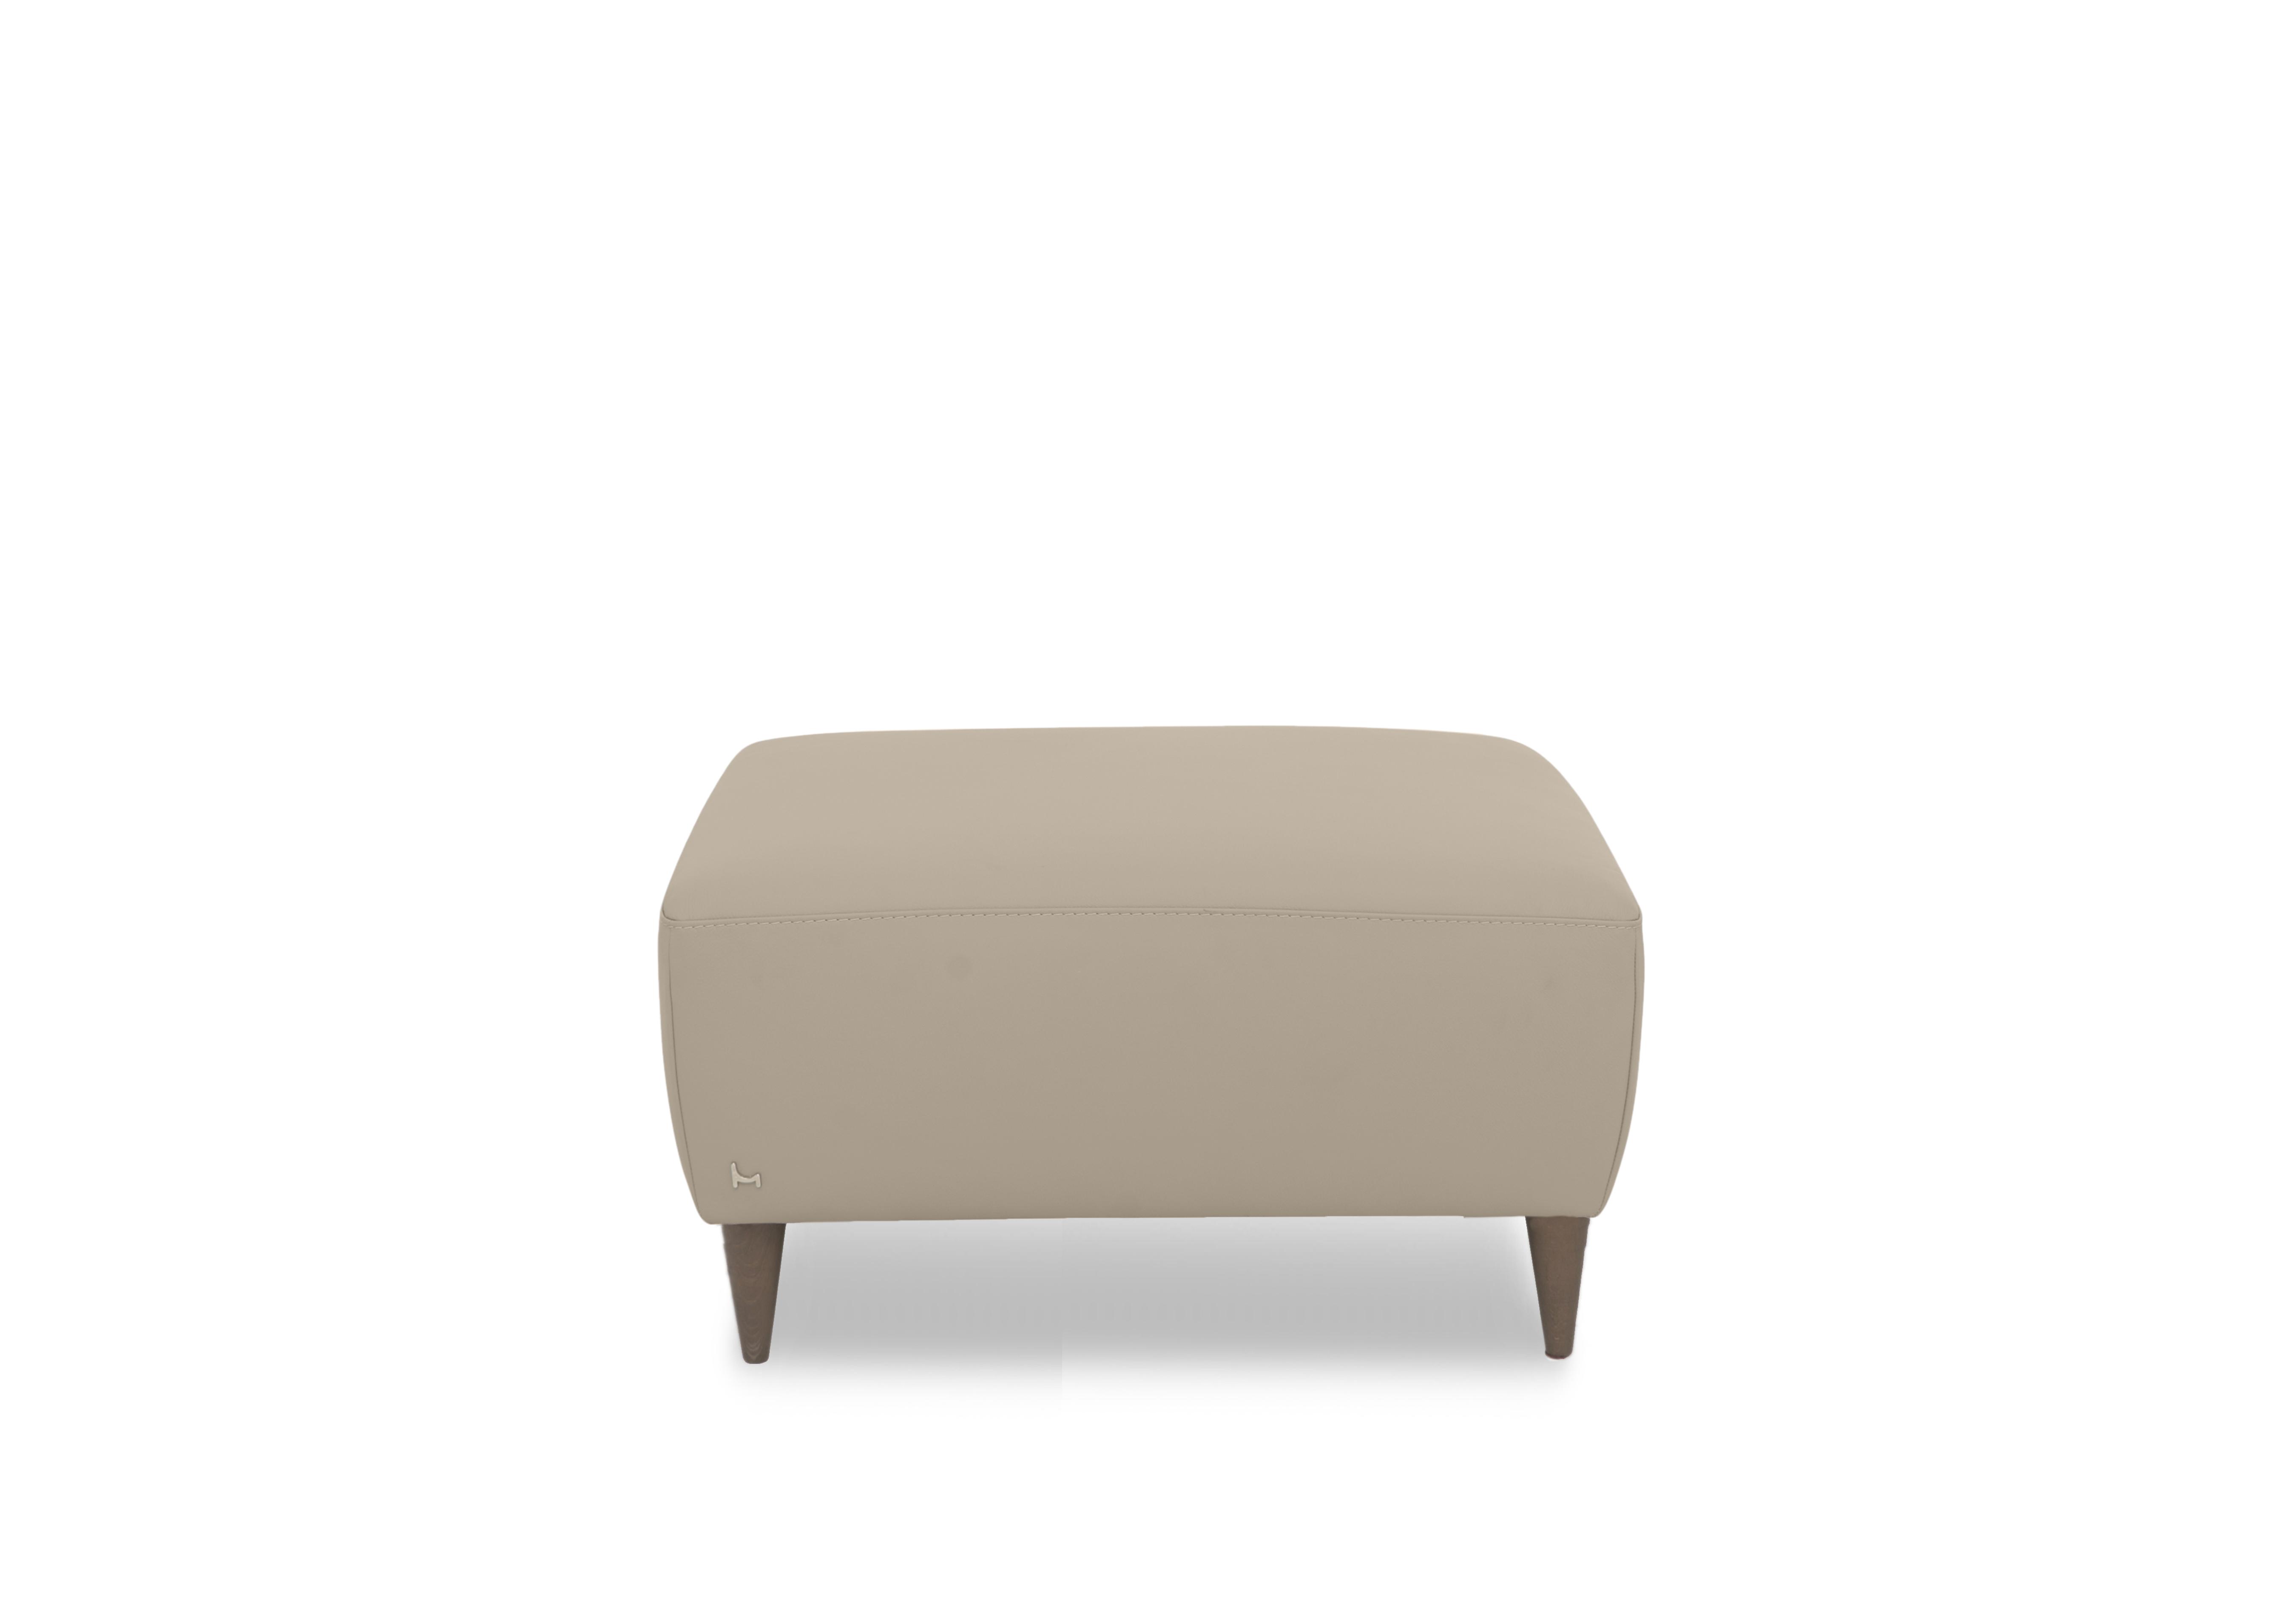 Milano Leather Footstool in 352 Torello Fango To Ft on Furniture Village